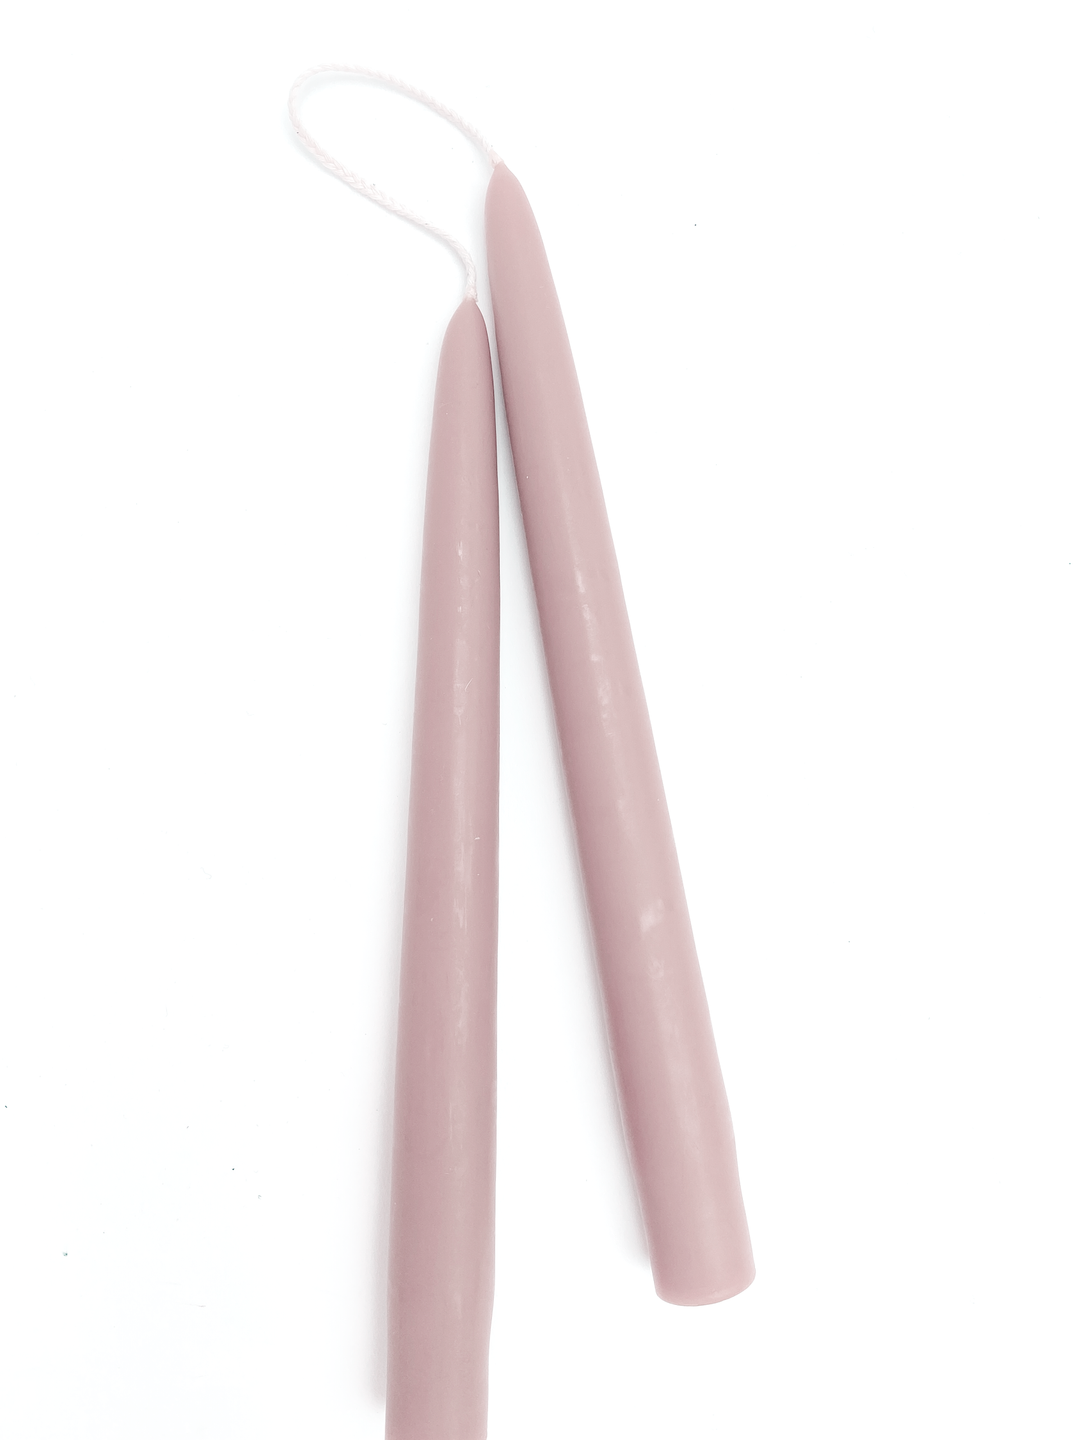 Dripless Taper Candles in Mauvelous | 9" (Pair)